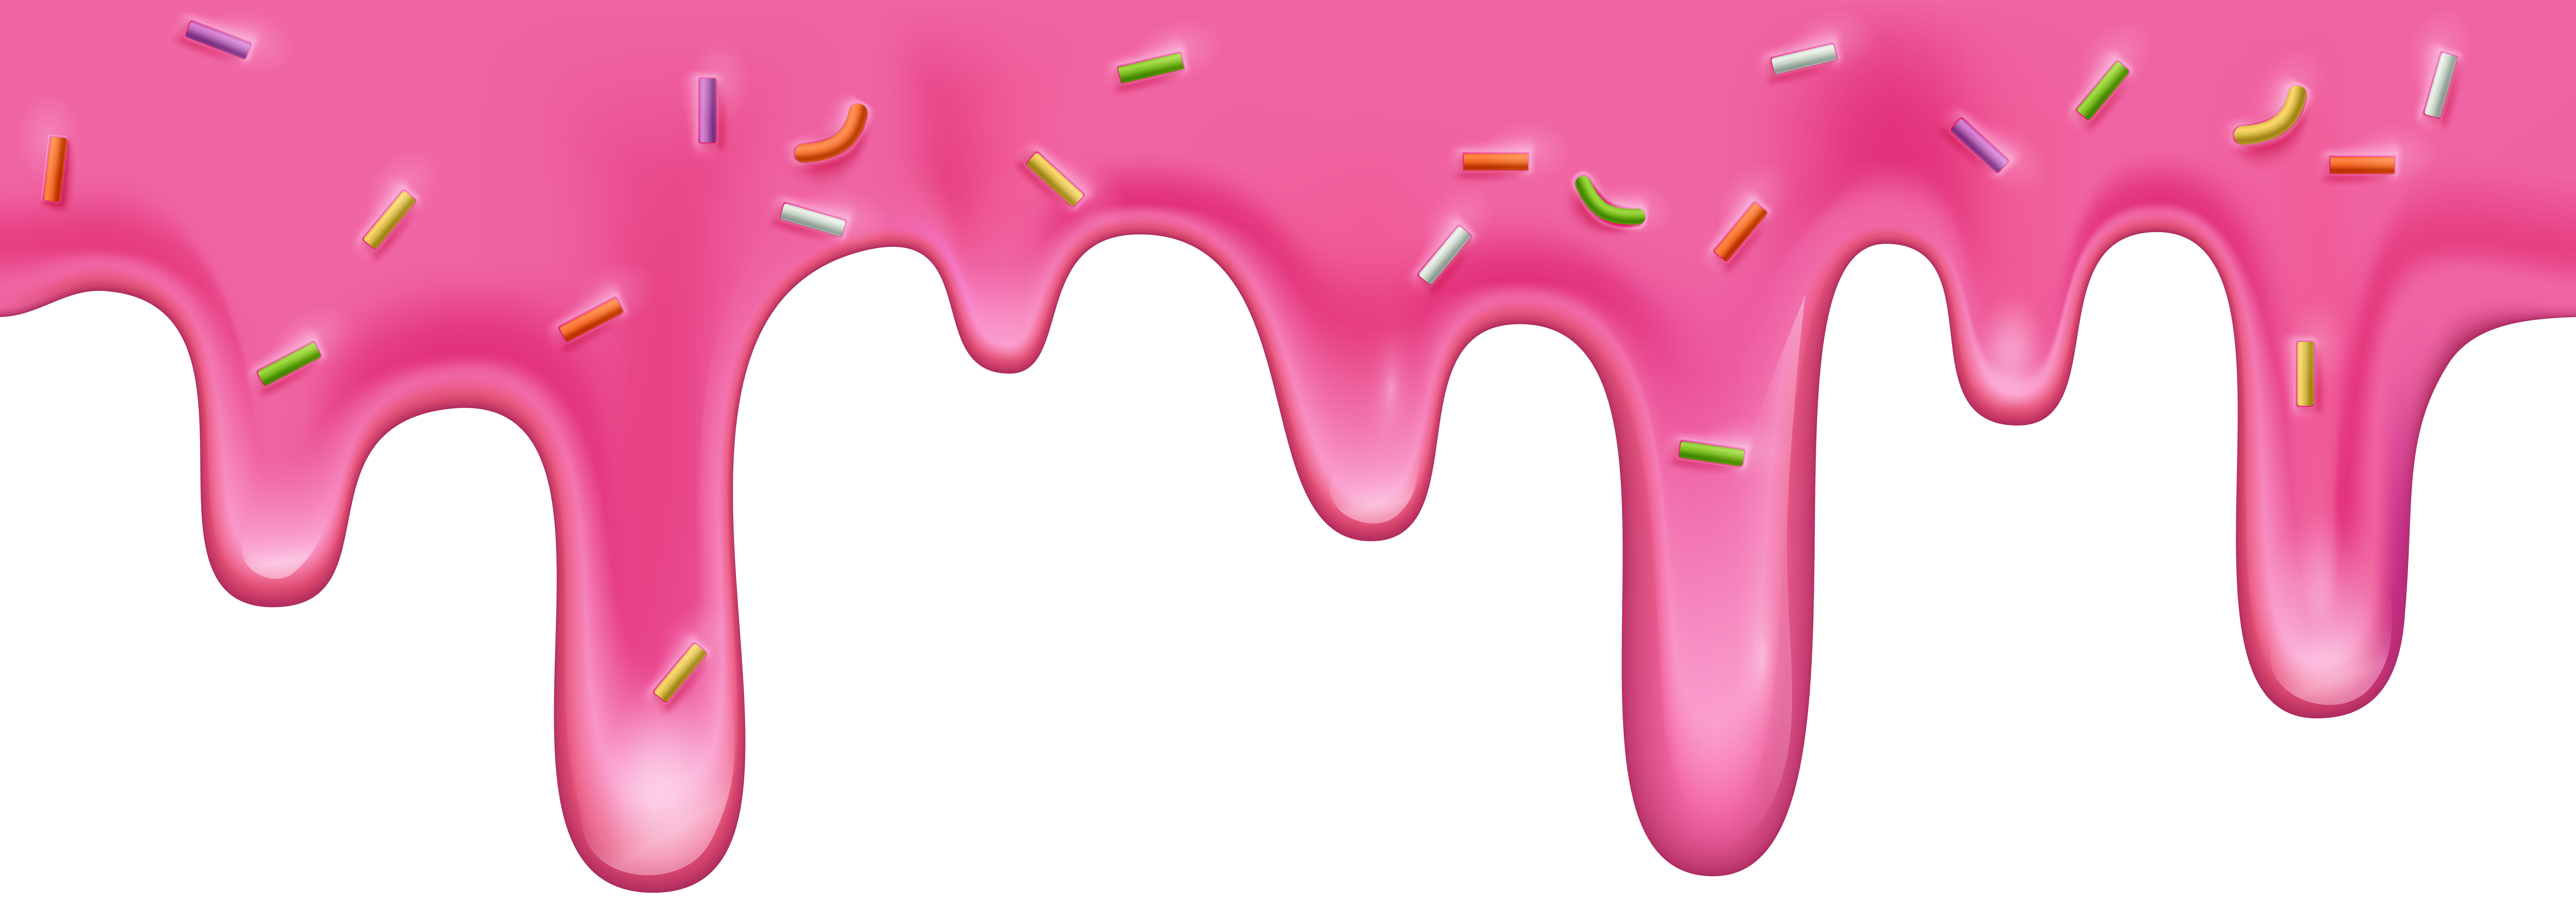 Pink Cream Drip Clip Art Image Quality Image And Transparent PNG Free Clipart. Clip Art, Art Image, Free Clip Art